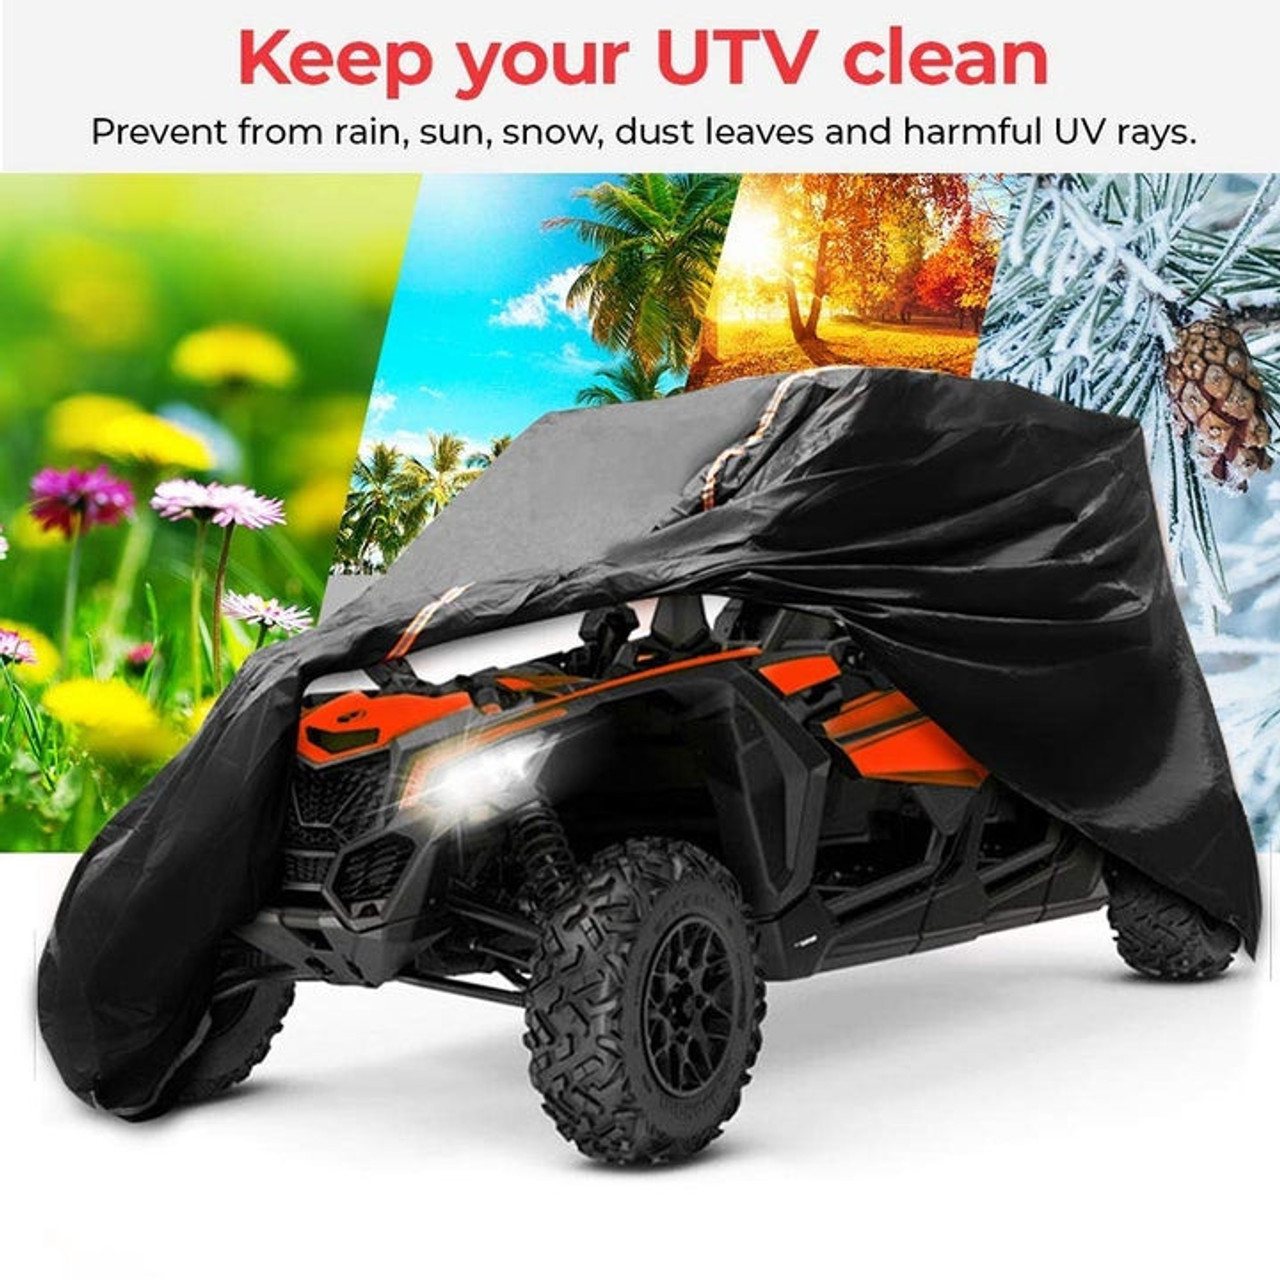 https://cdn11.bigcommerce.com/s-7k4n21ibmh/images/stencil/1280x1280/products/33297/147749/utv_cover_4-seater_fit_can_am_maverick_x3_max___rzr_1000_pro_4_-_kemimoto_1__4_1_1__57372.1694180870.jpg?c=1